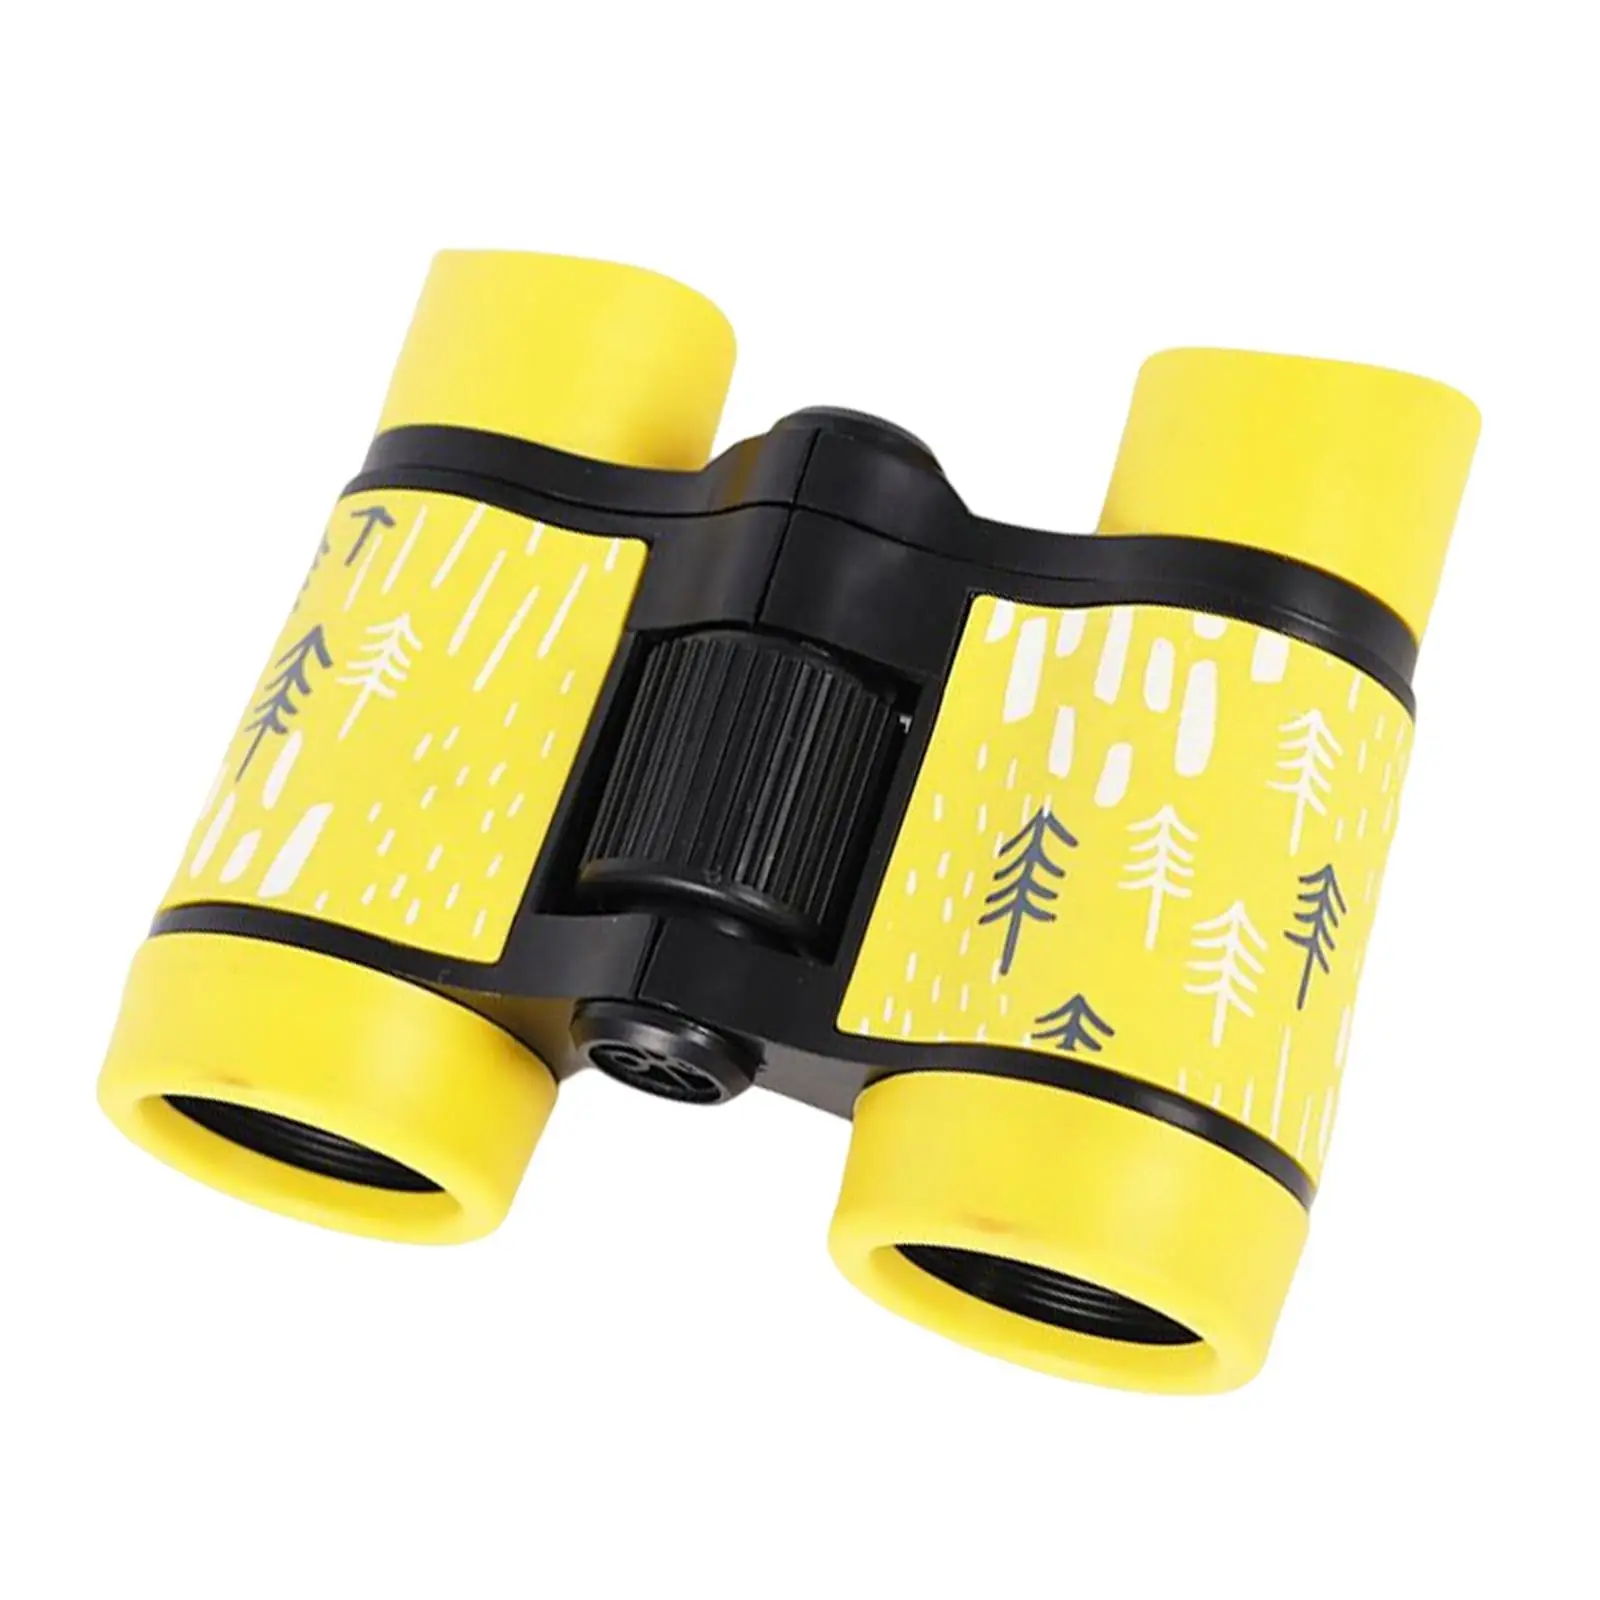 Kids Binocular Foldable Gift Shockproof Educational 4x30mm Compact Telescope Toy for Travel Outdoor Learning Camping Boys Girls